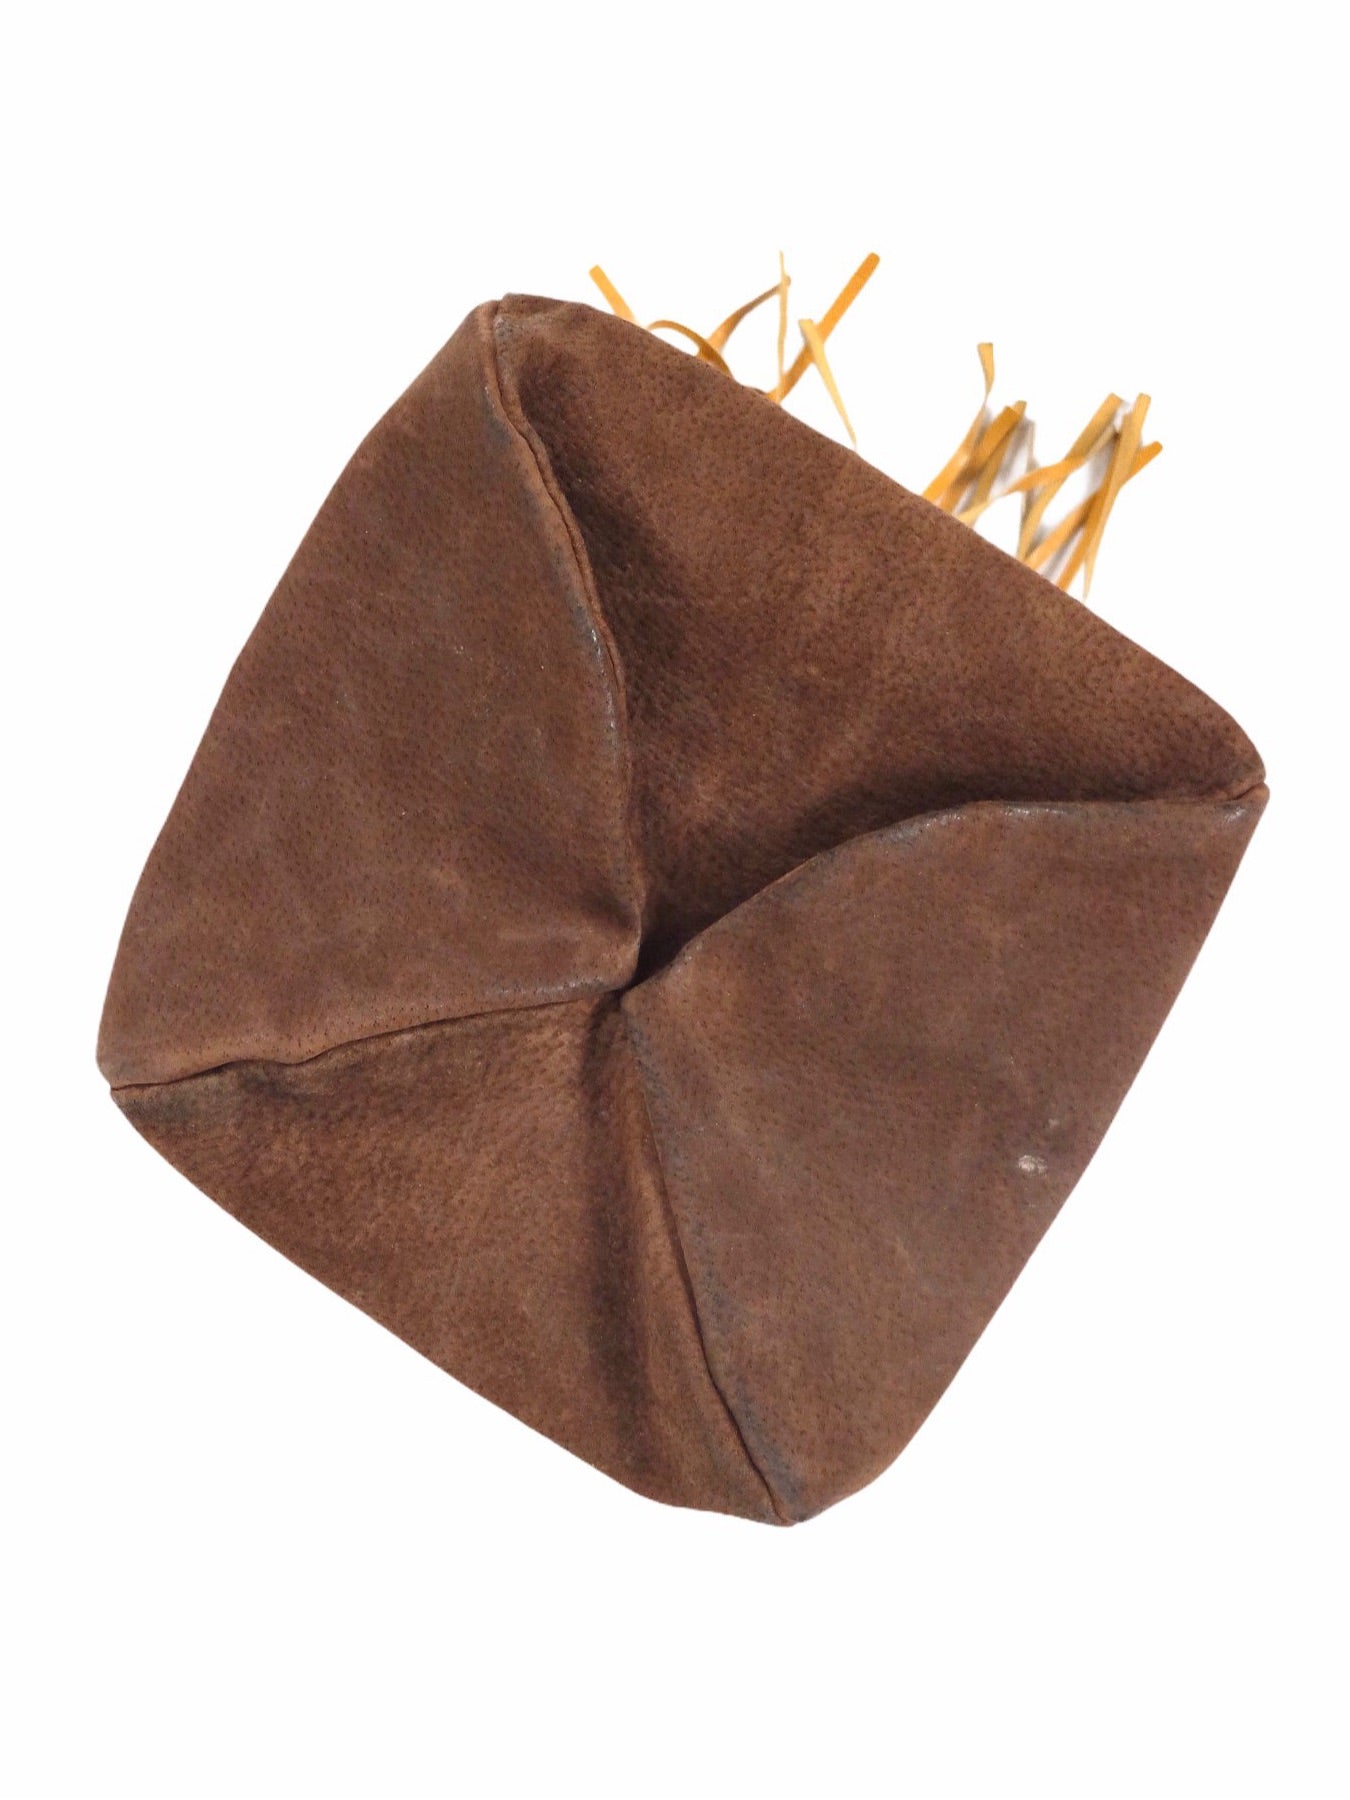 cotton canvas bohemian hippie bucket bag-Brown-One size – Lakhay